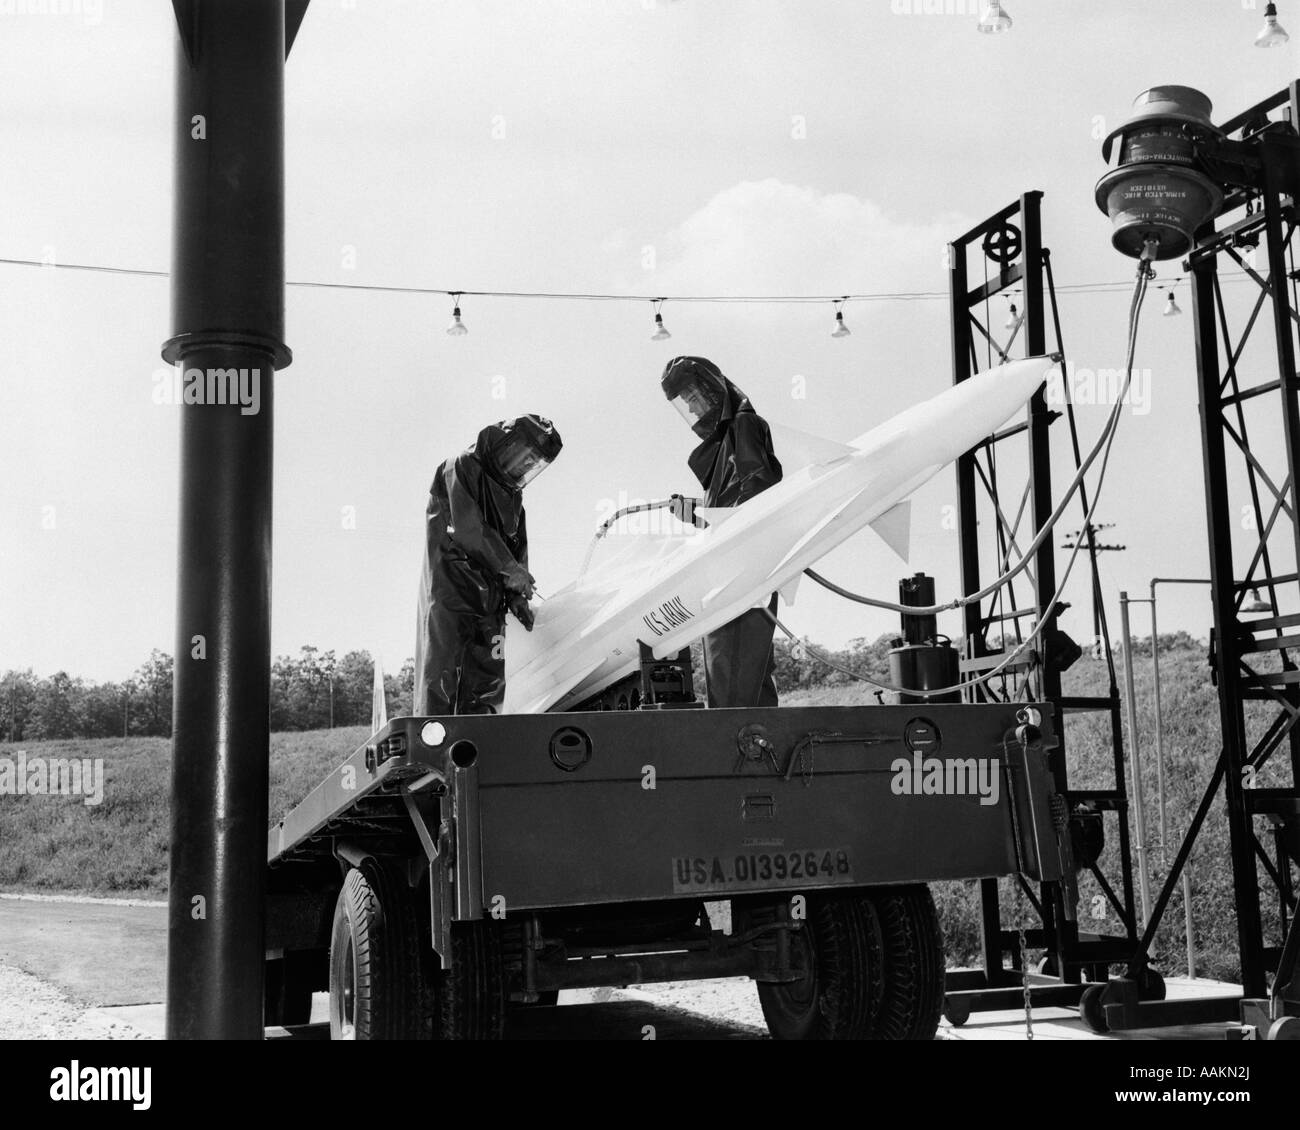 https://c8.alamy.com/comp/AAKN2J/1960s-us-army-nike-guided-missile-on-launch-pad-being-fueled-fuel-AAKN2J.jpg